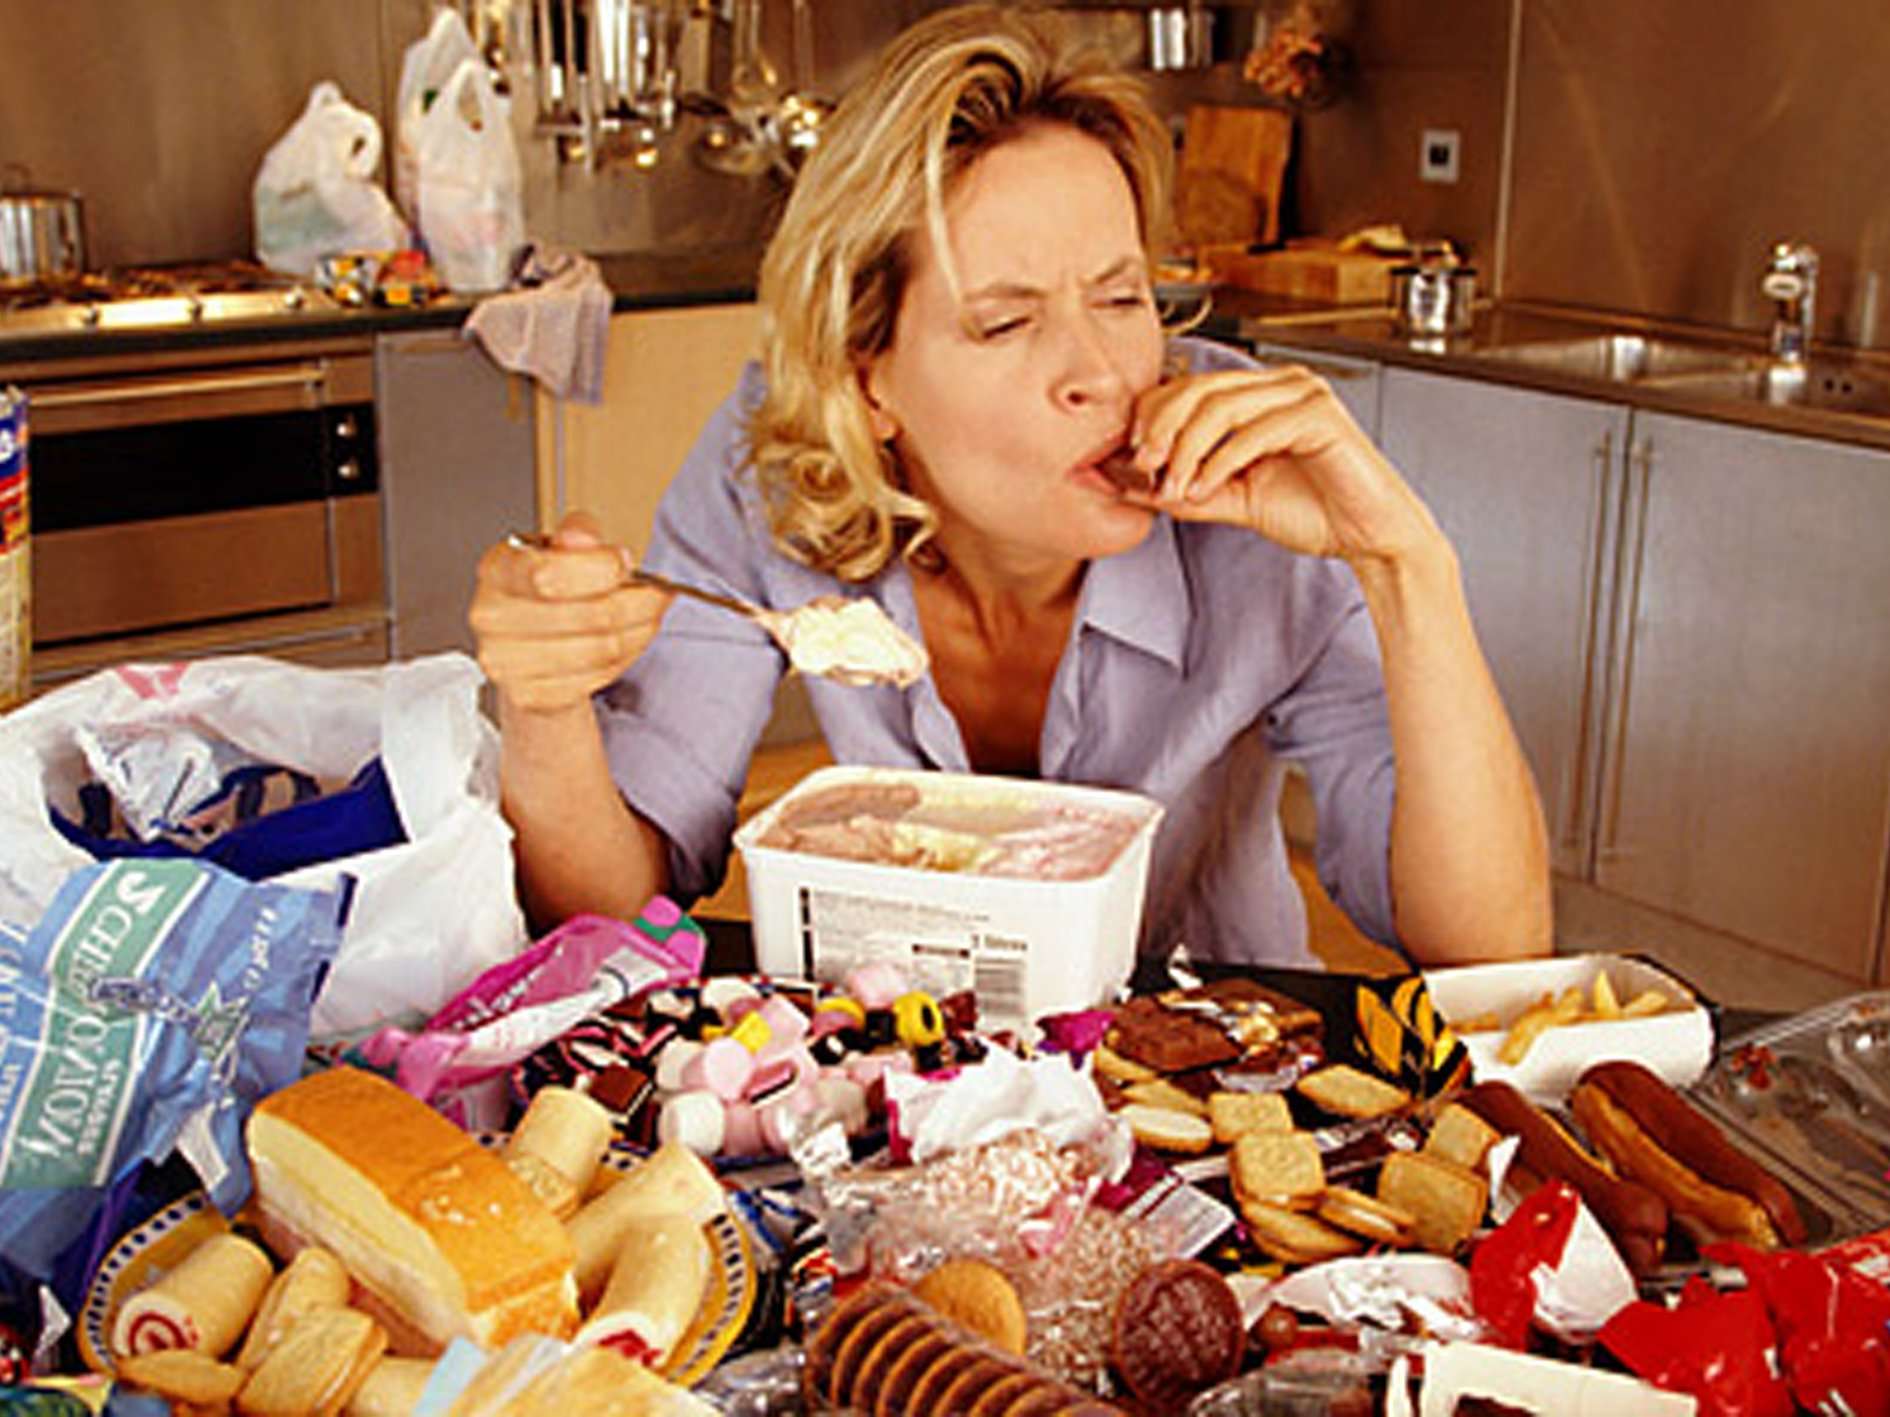 Food addiction: How to know if you